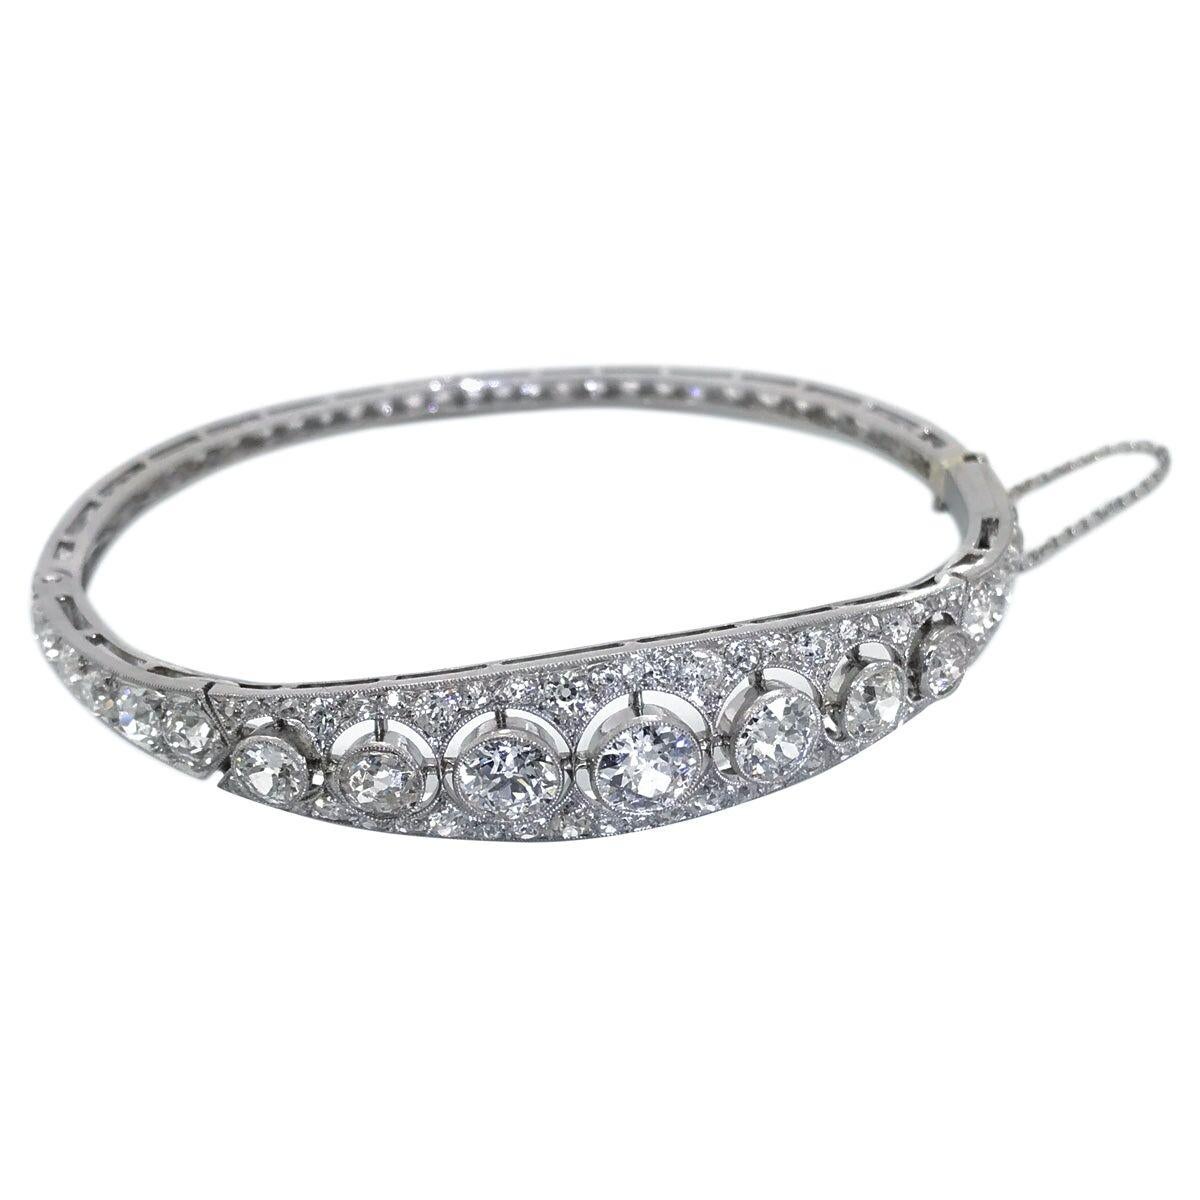 This is an amazing bangle, you won't see too many of these, a rare one-of-a-kind piece of jewellery that will be handed down to future generations. A gorgeous French platinum bangle with 7 old European cut diamonds highlighted across the top